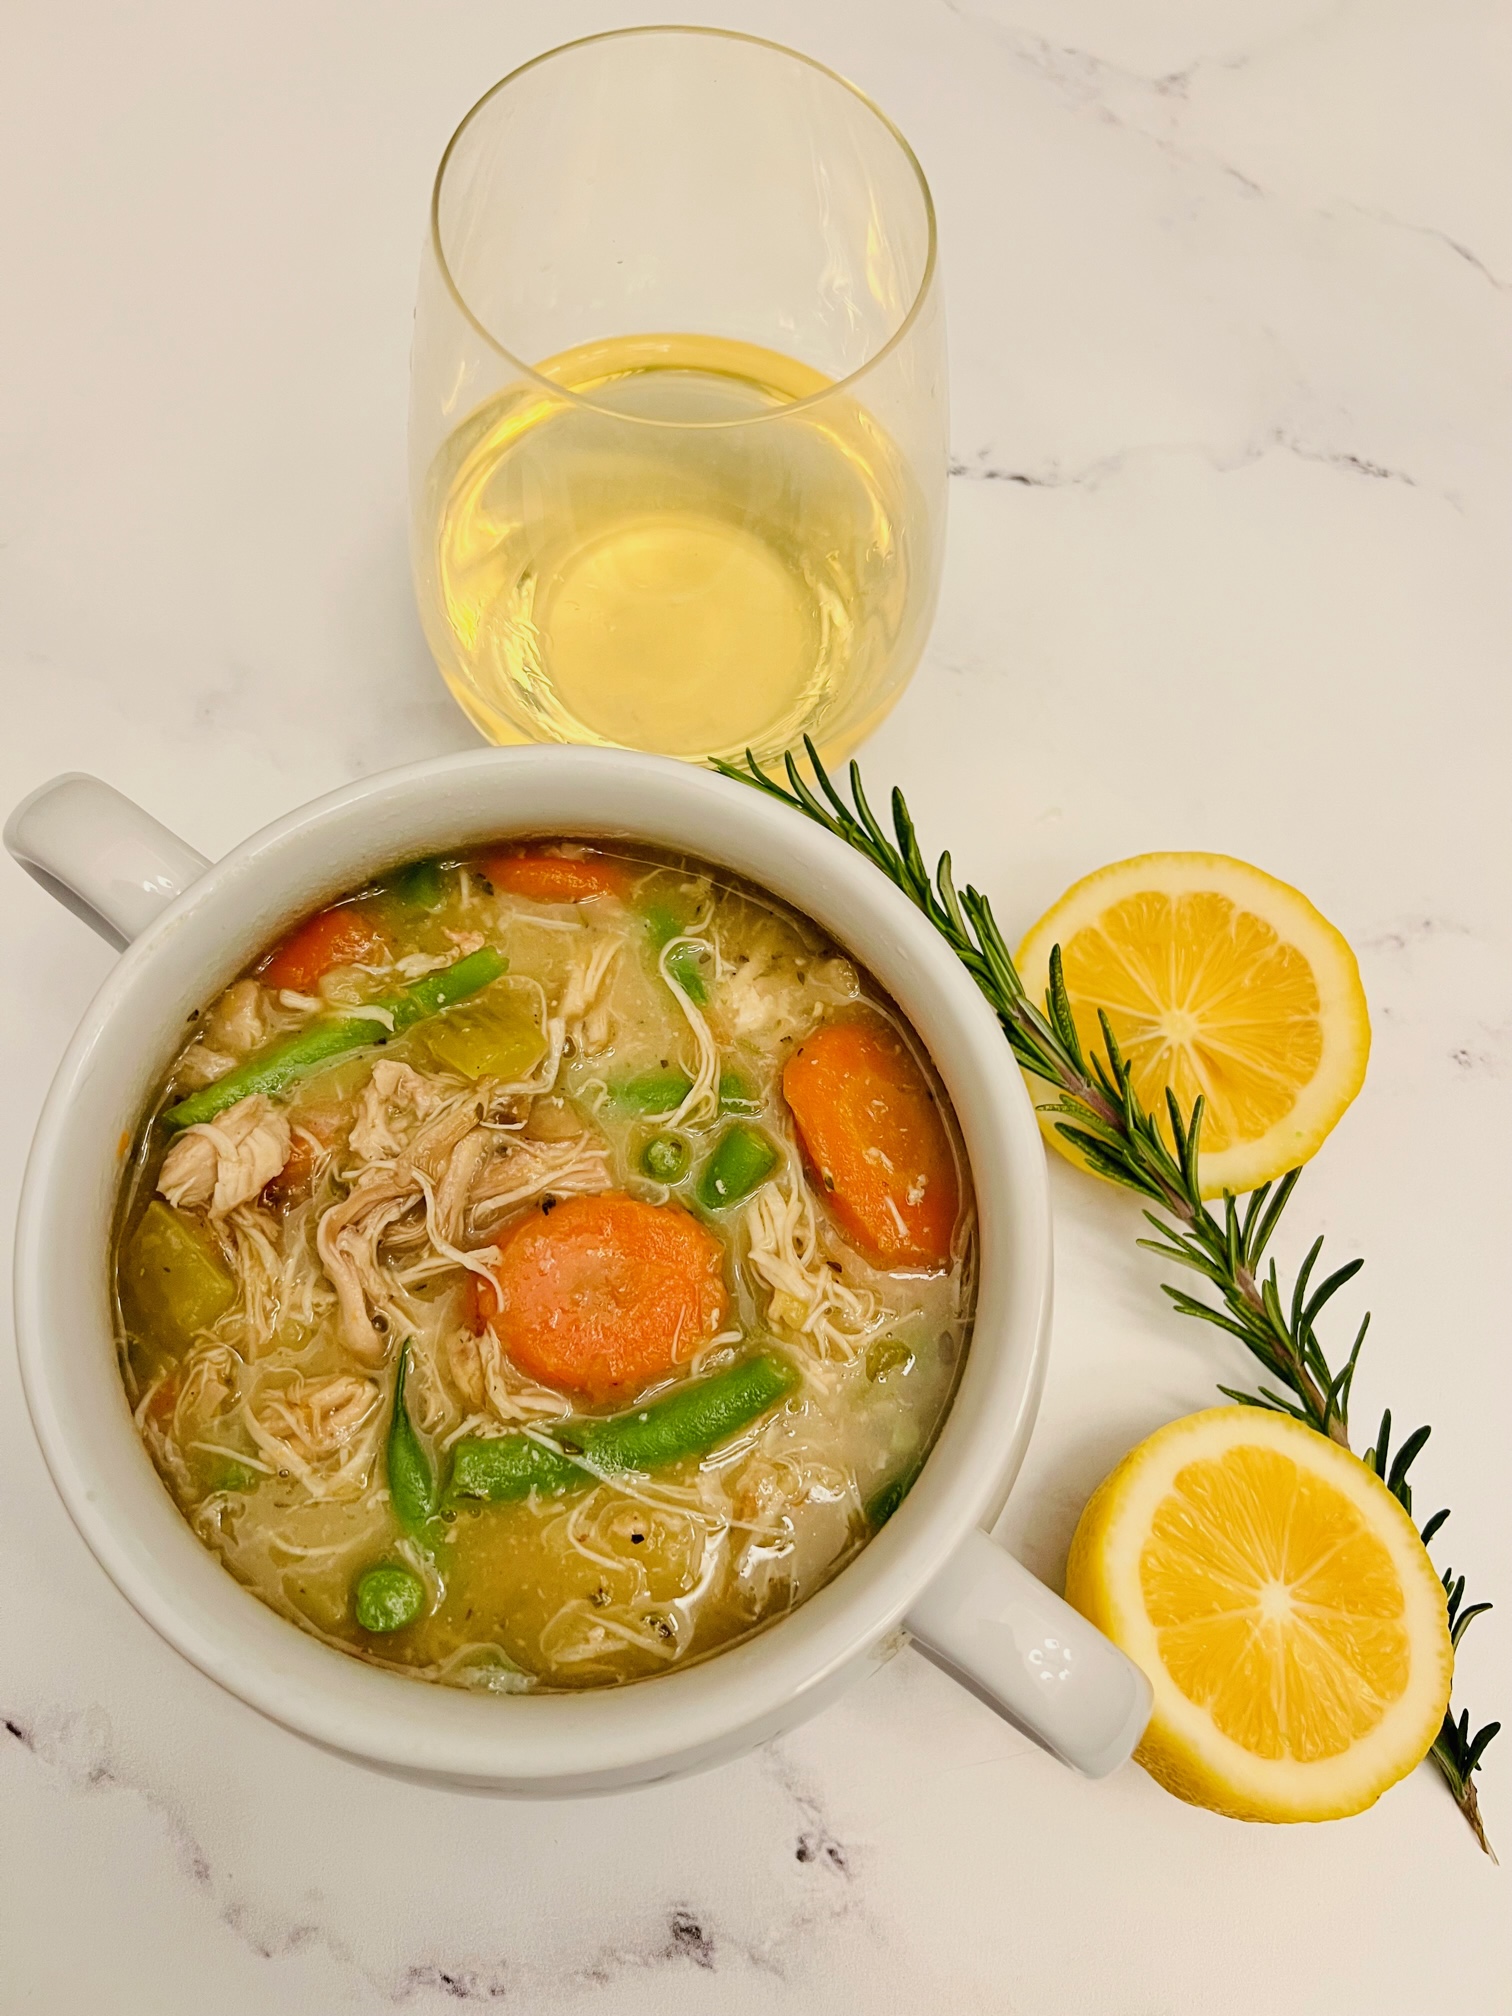 Slow-cooker Chicken Stew in a bowl with a glass of white wine. On the table are two slices of lemon and a sprig of rosemary